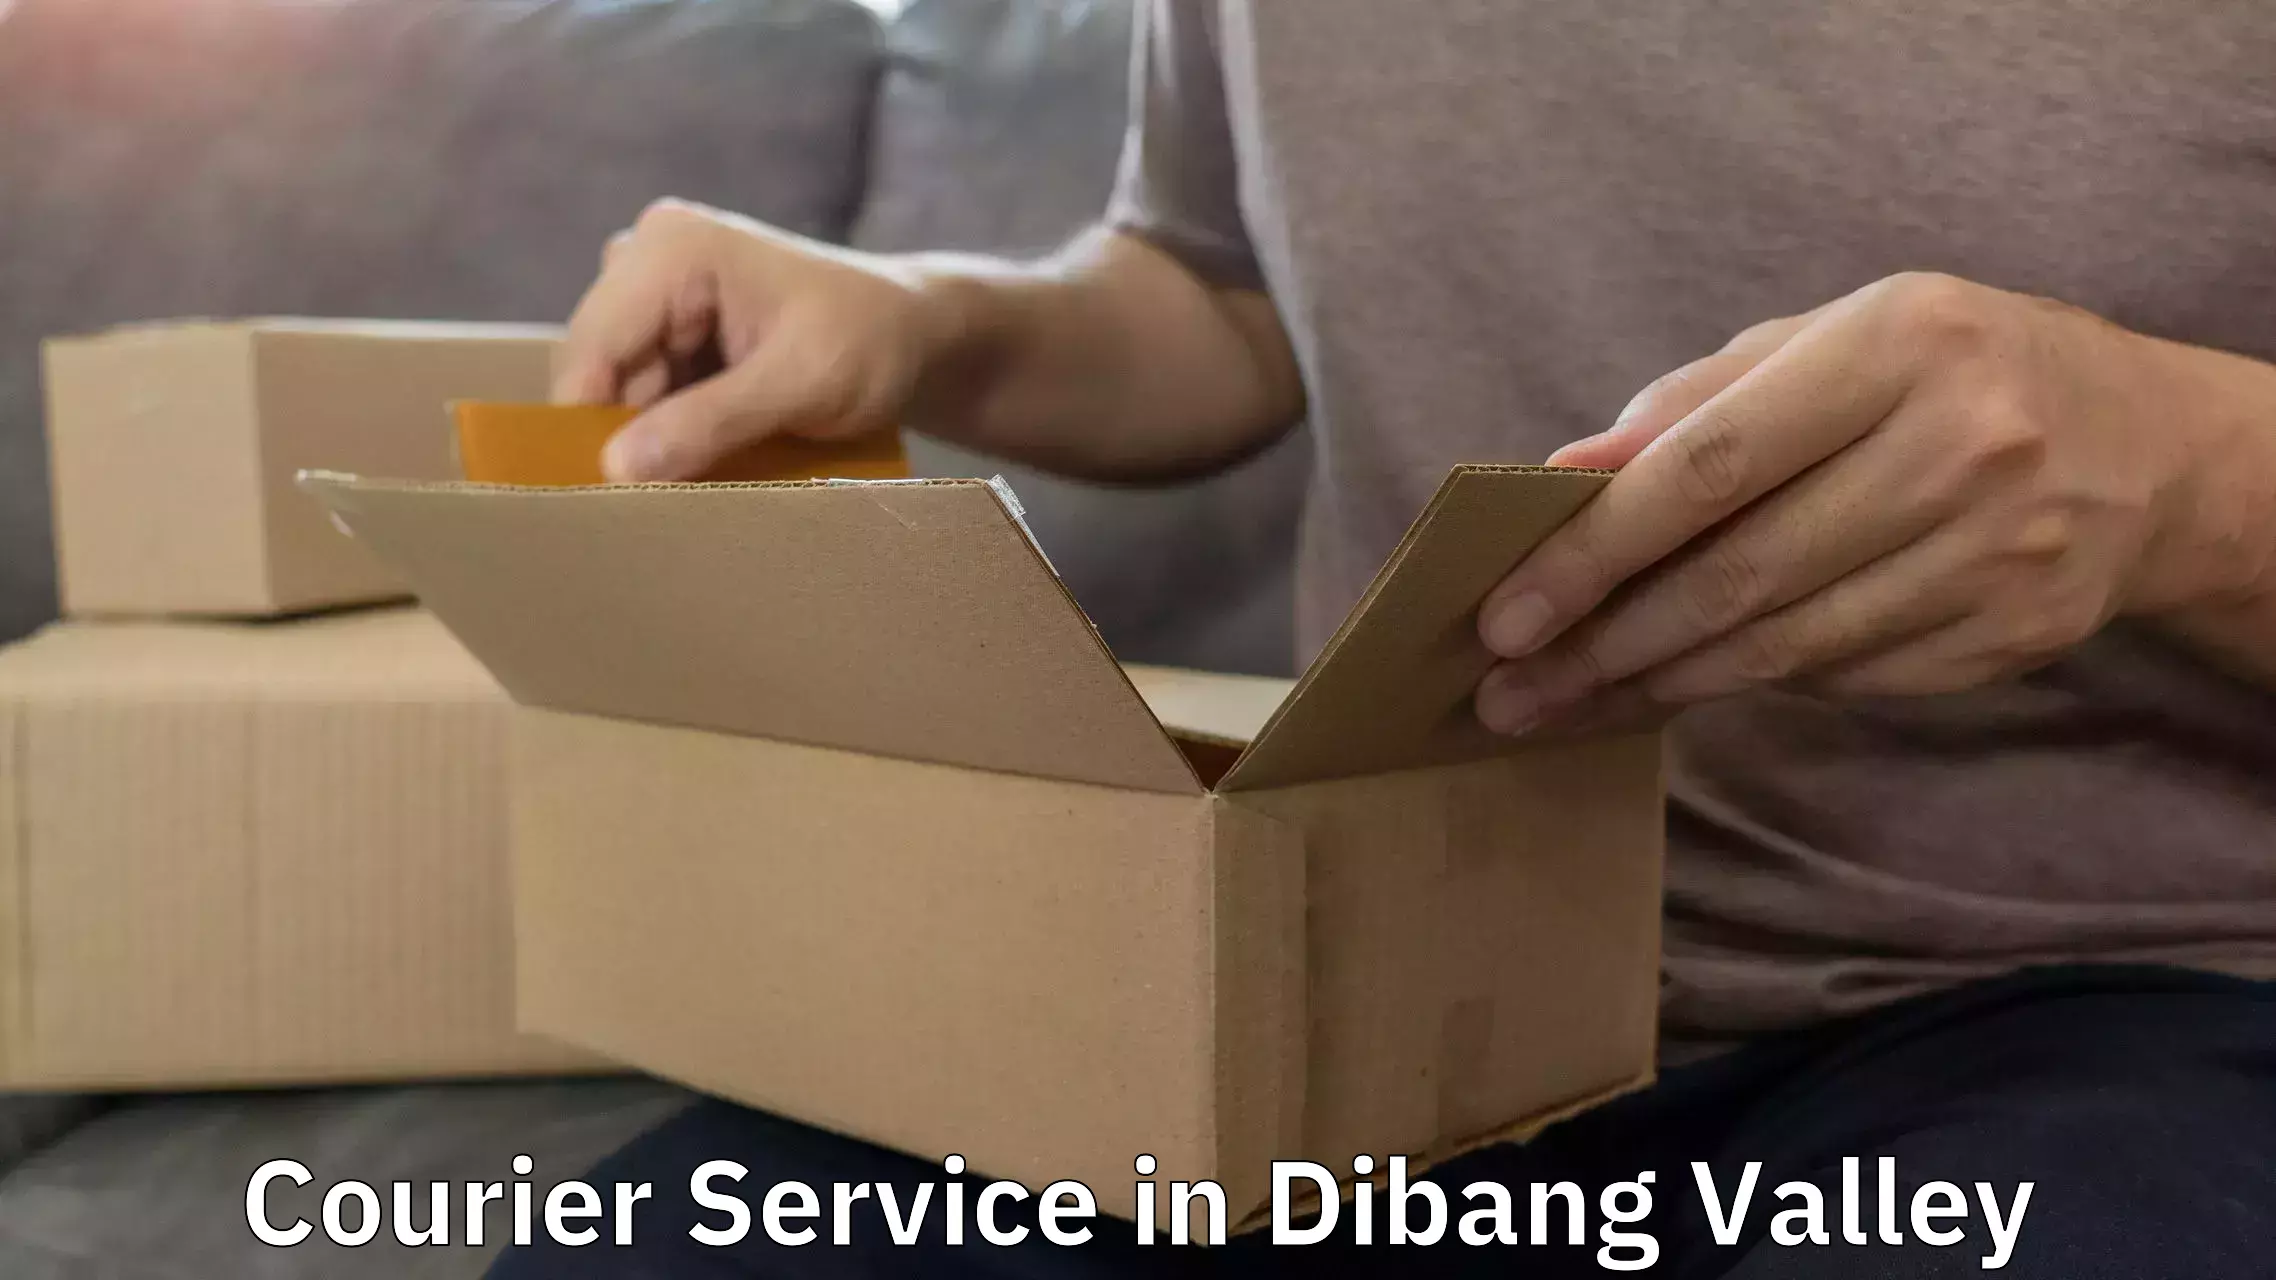 Affordable international shipping in Dibang Valley